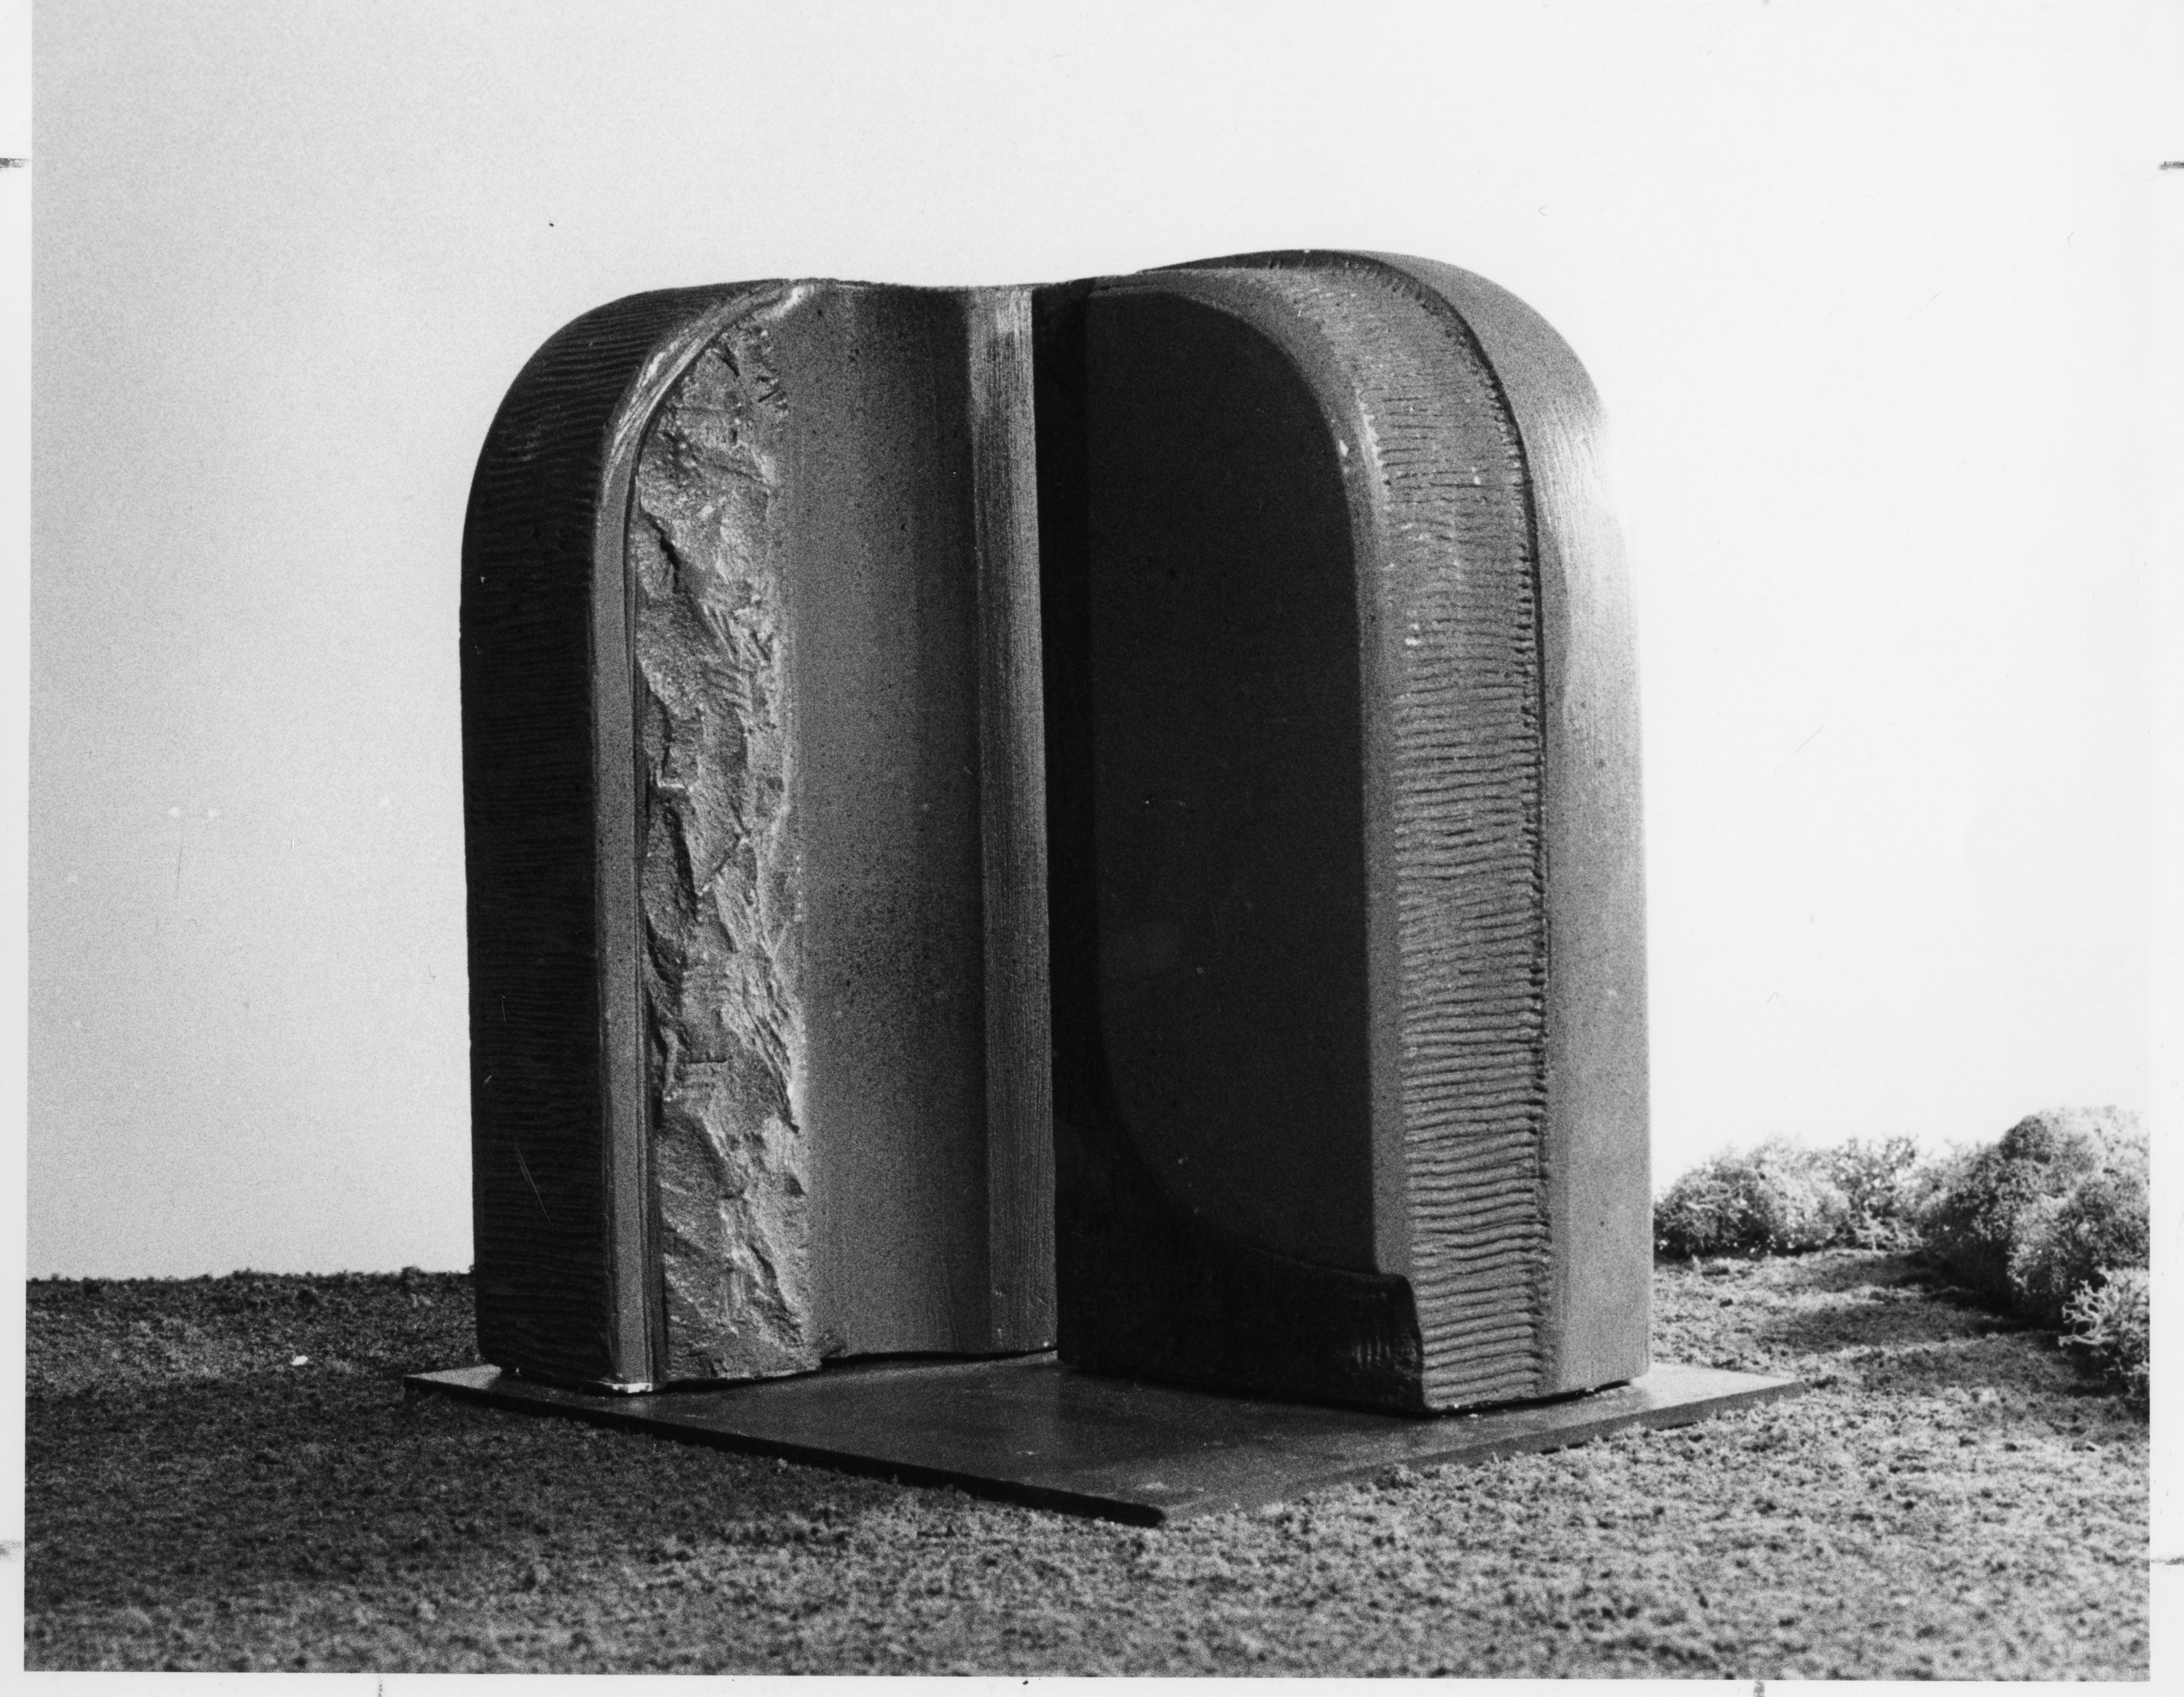 A small model (scale unknown) of the sculpture "Portal."